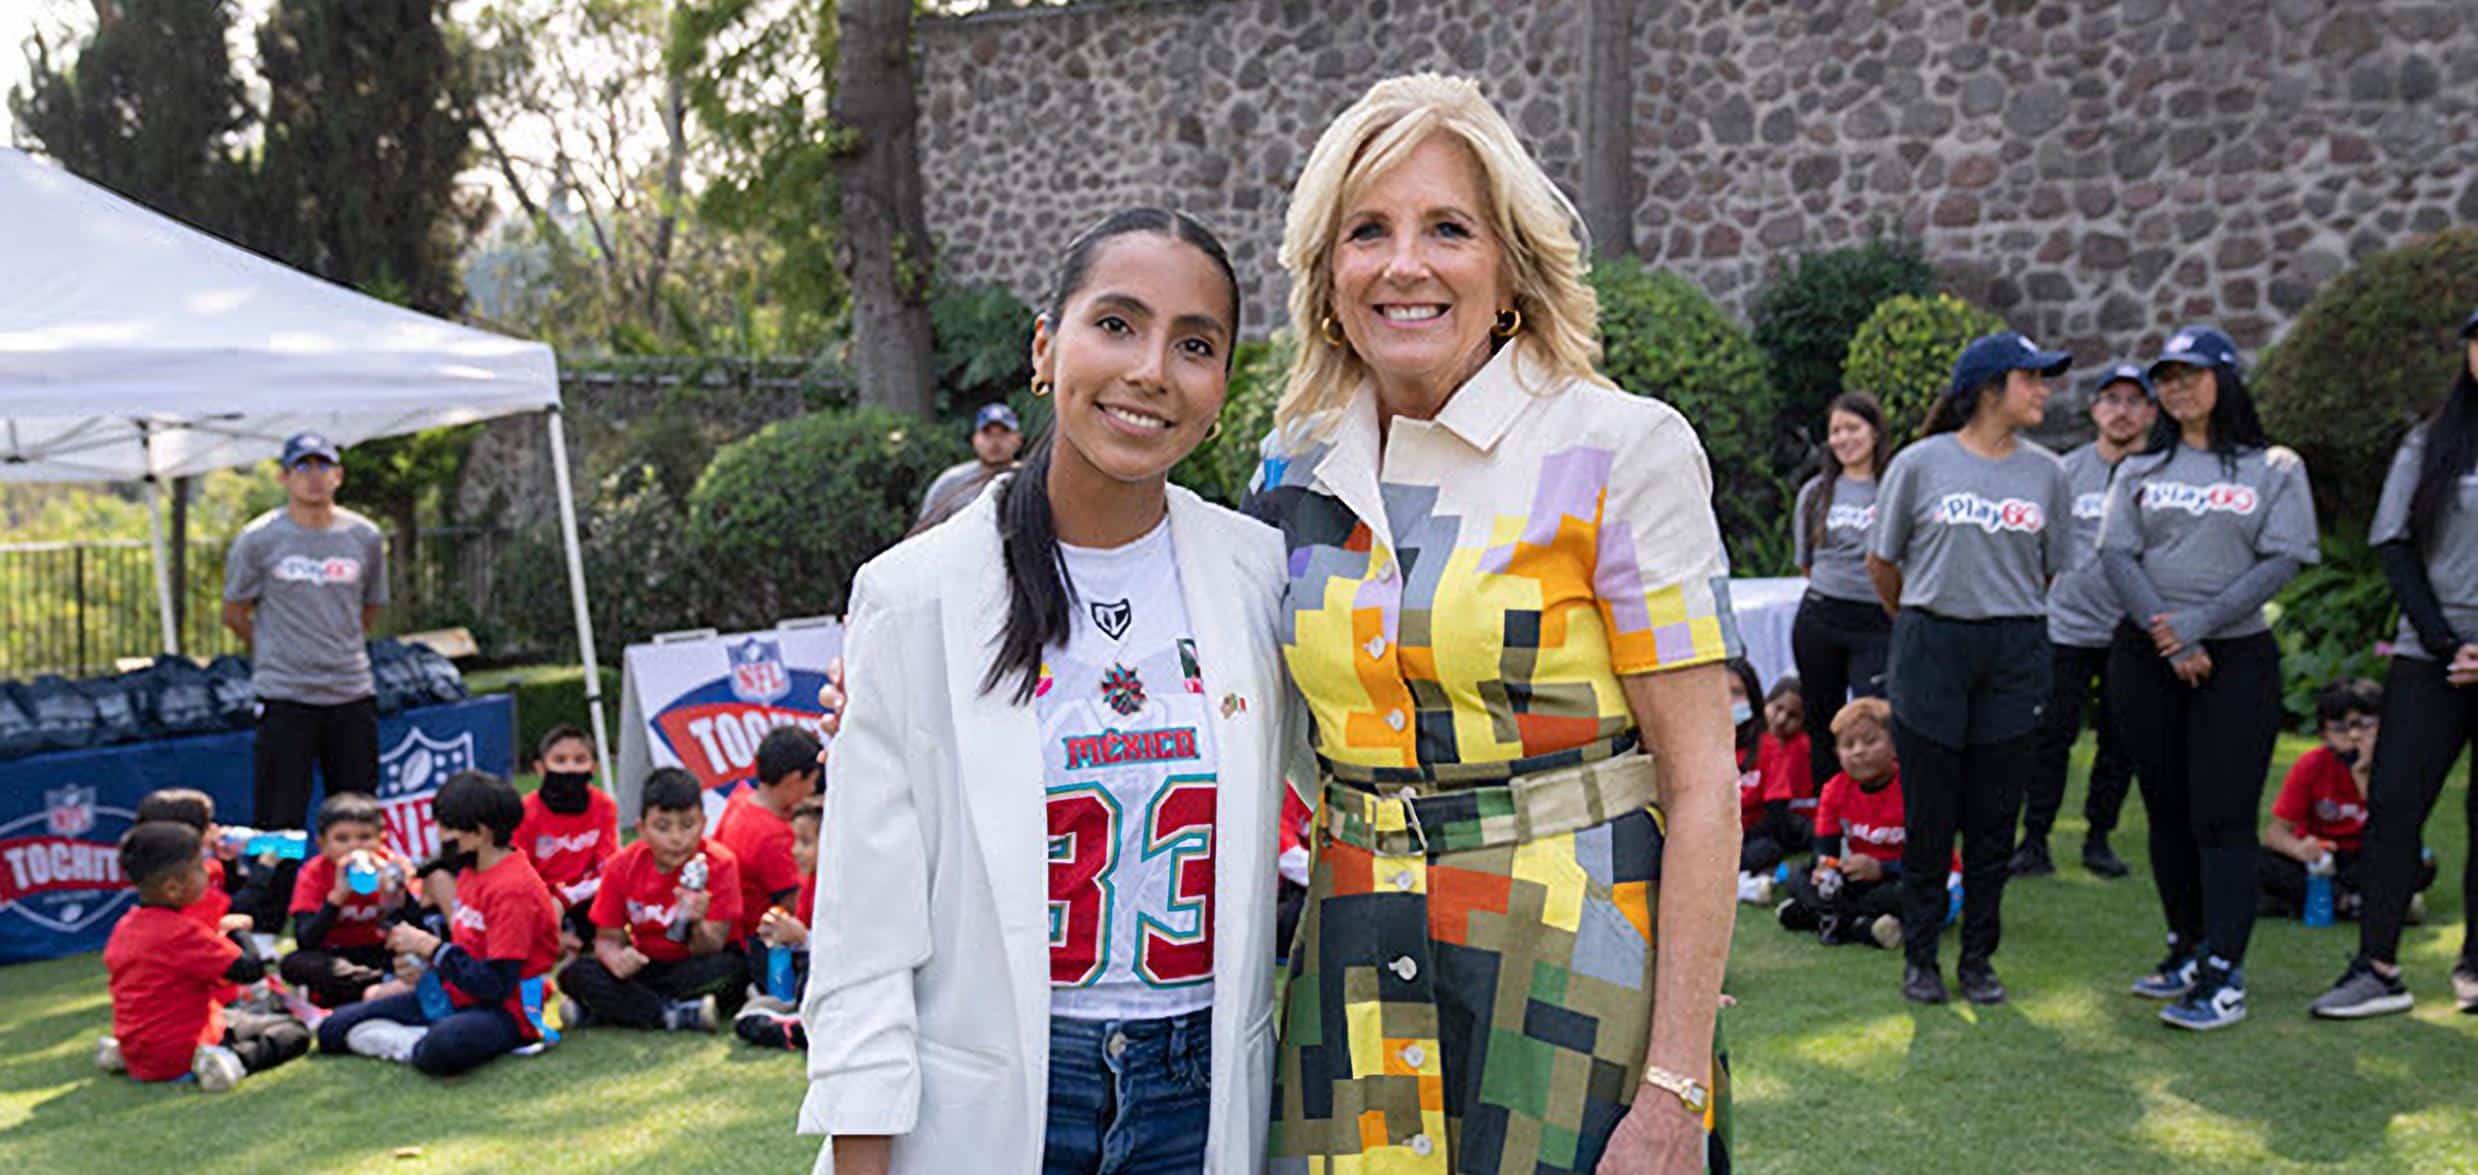 First lady of the united states visits tochito nfl flag football program in mexico city